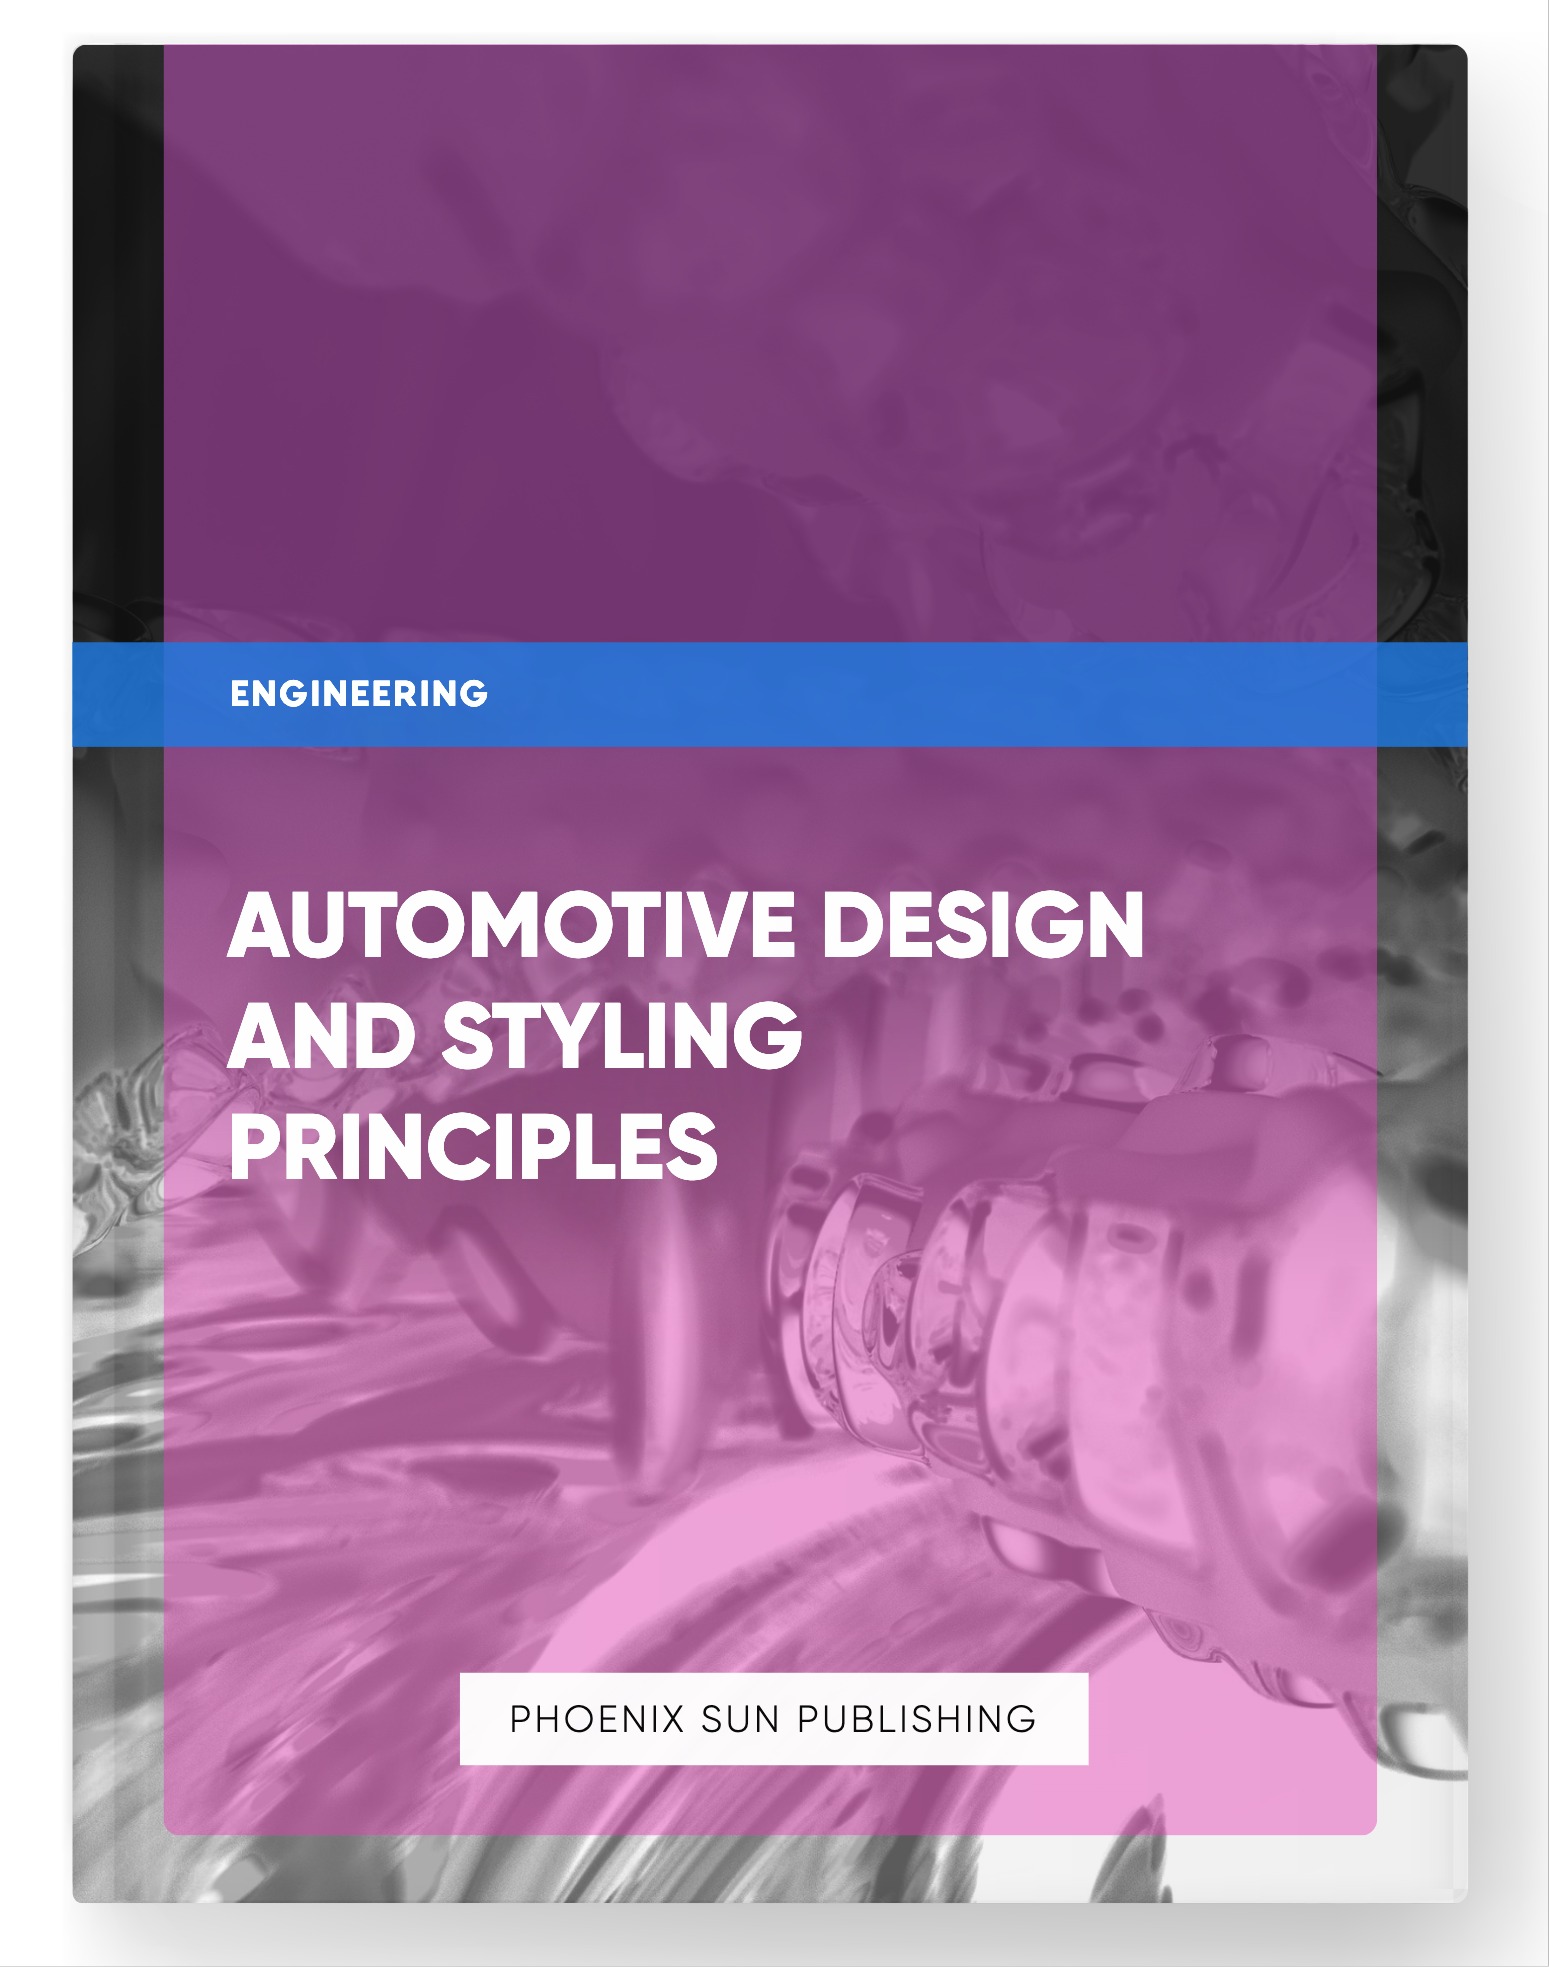 Automotive Design and Styling Principles